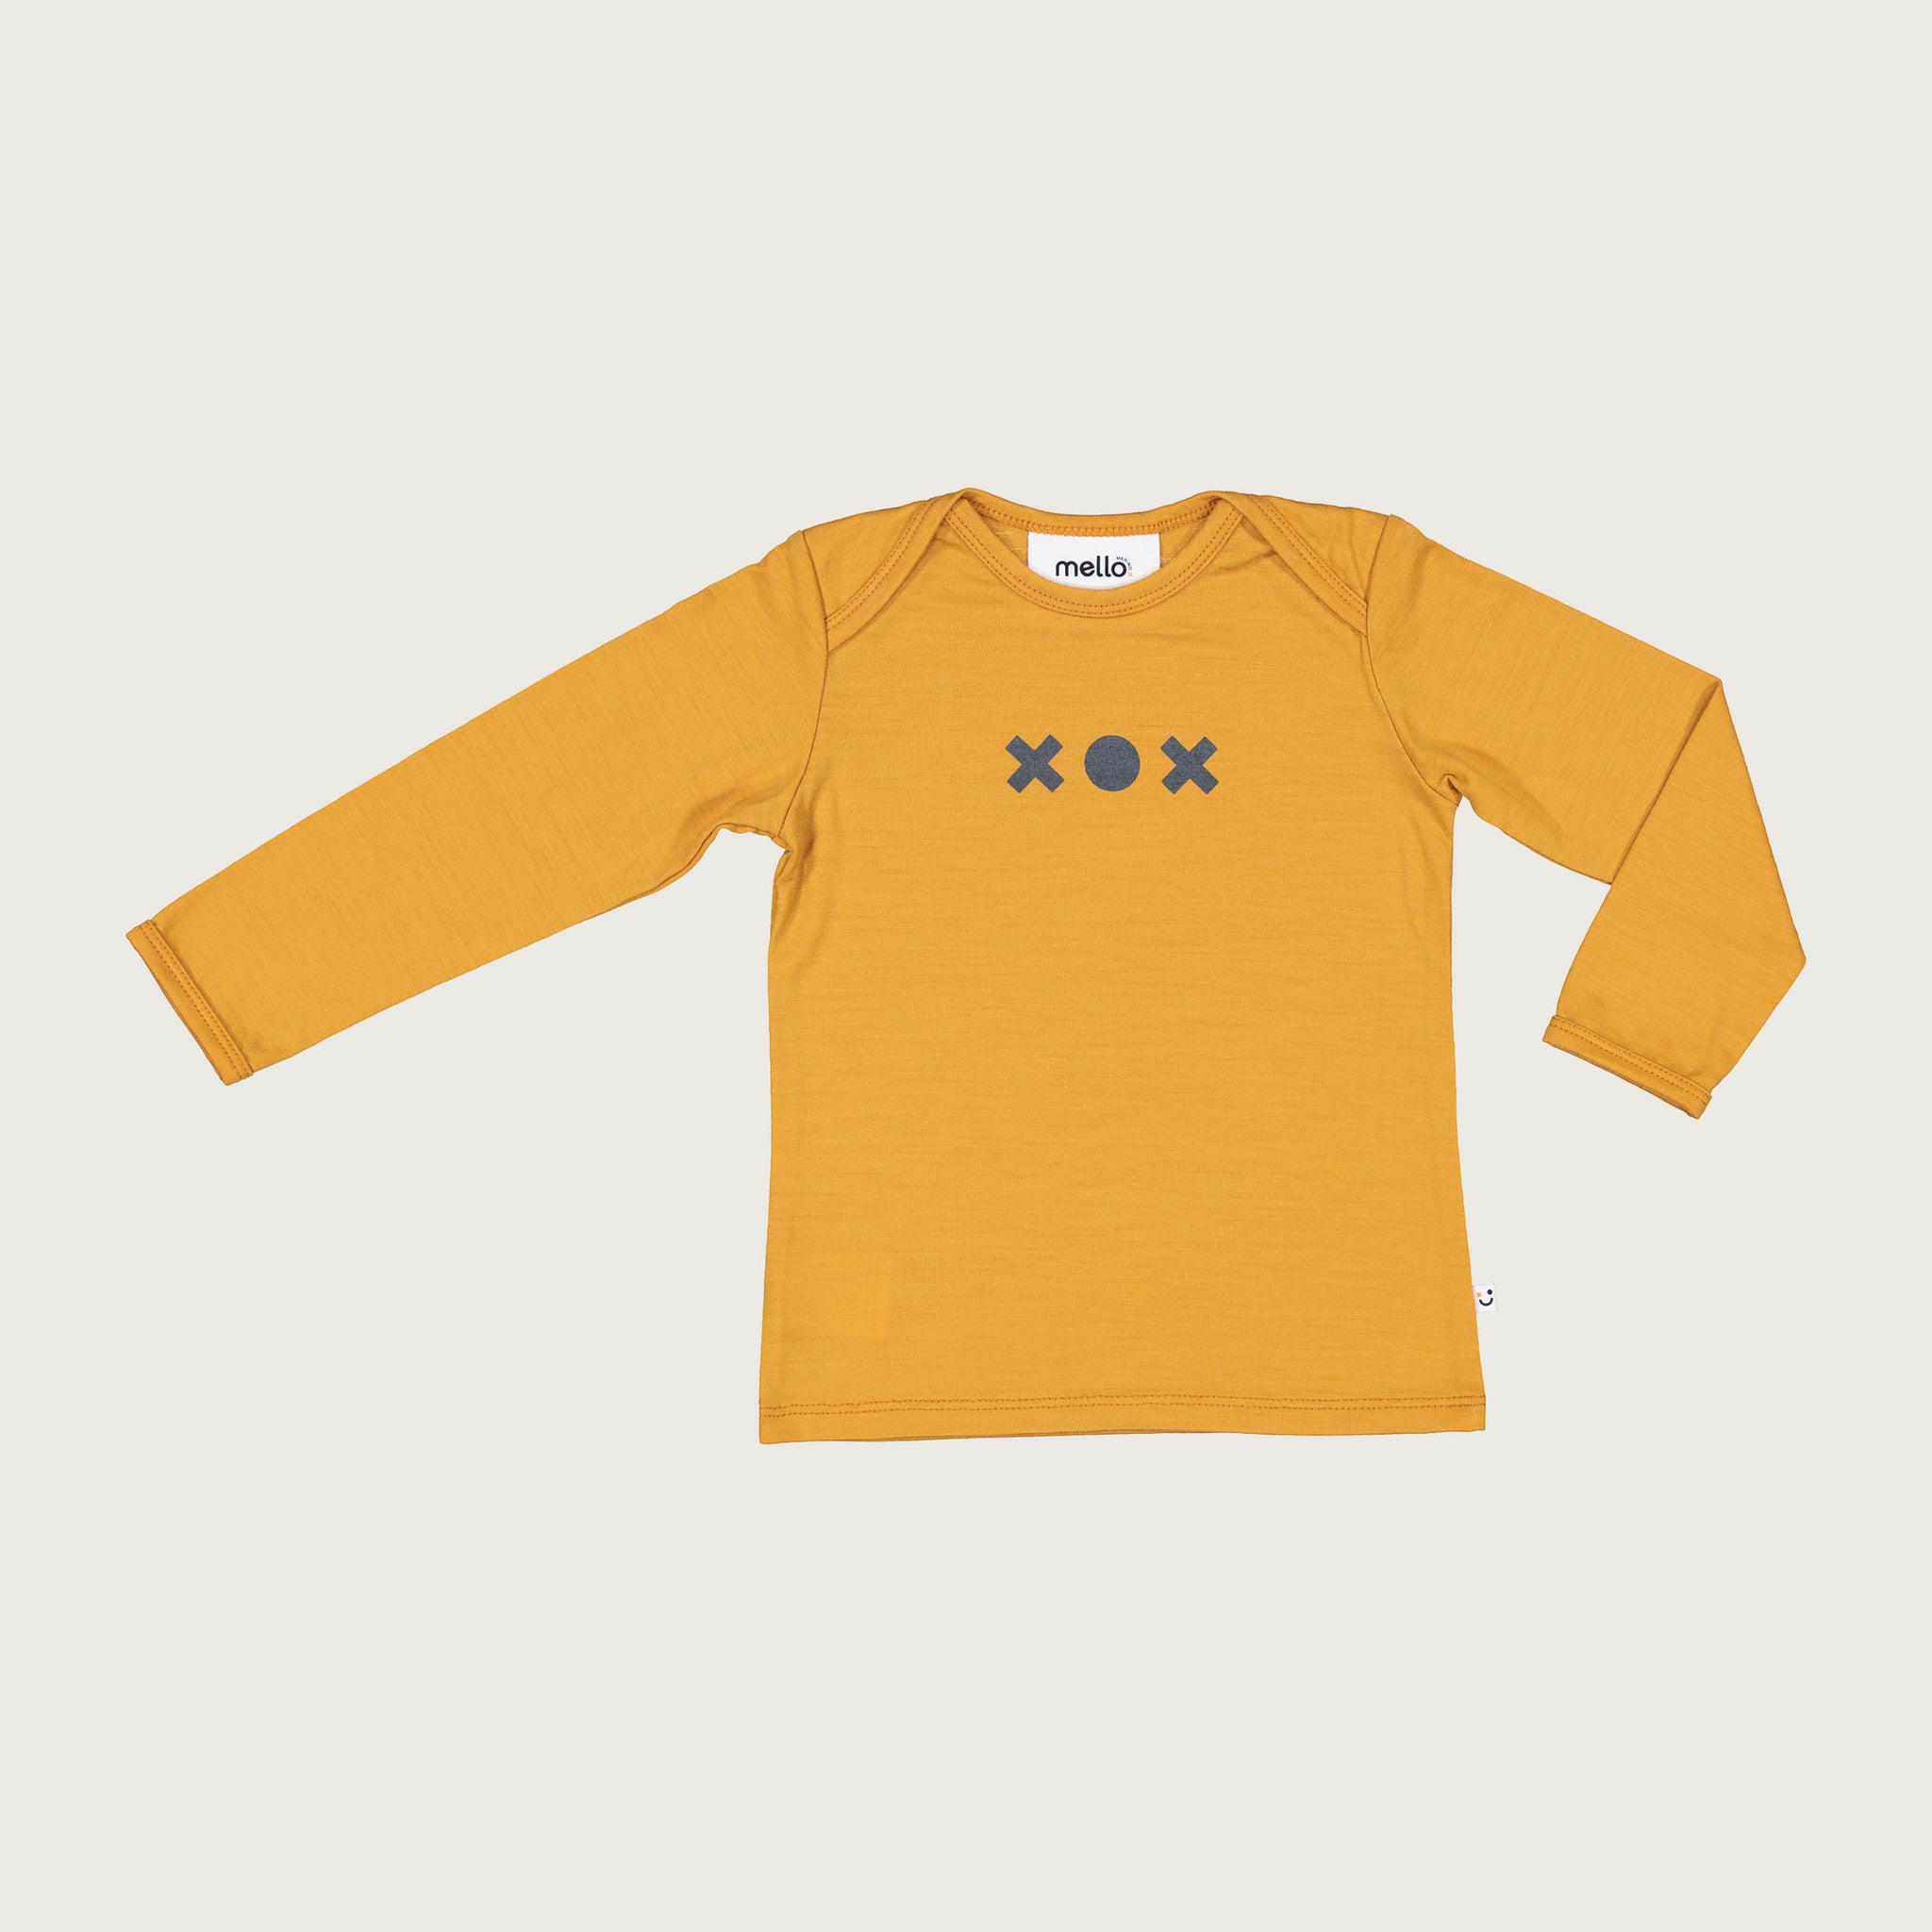 Merino baby long sleeve top nugget yellow with print